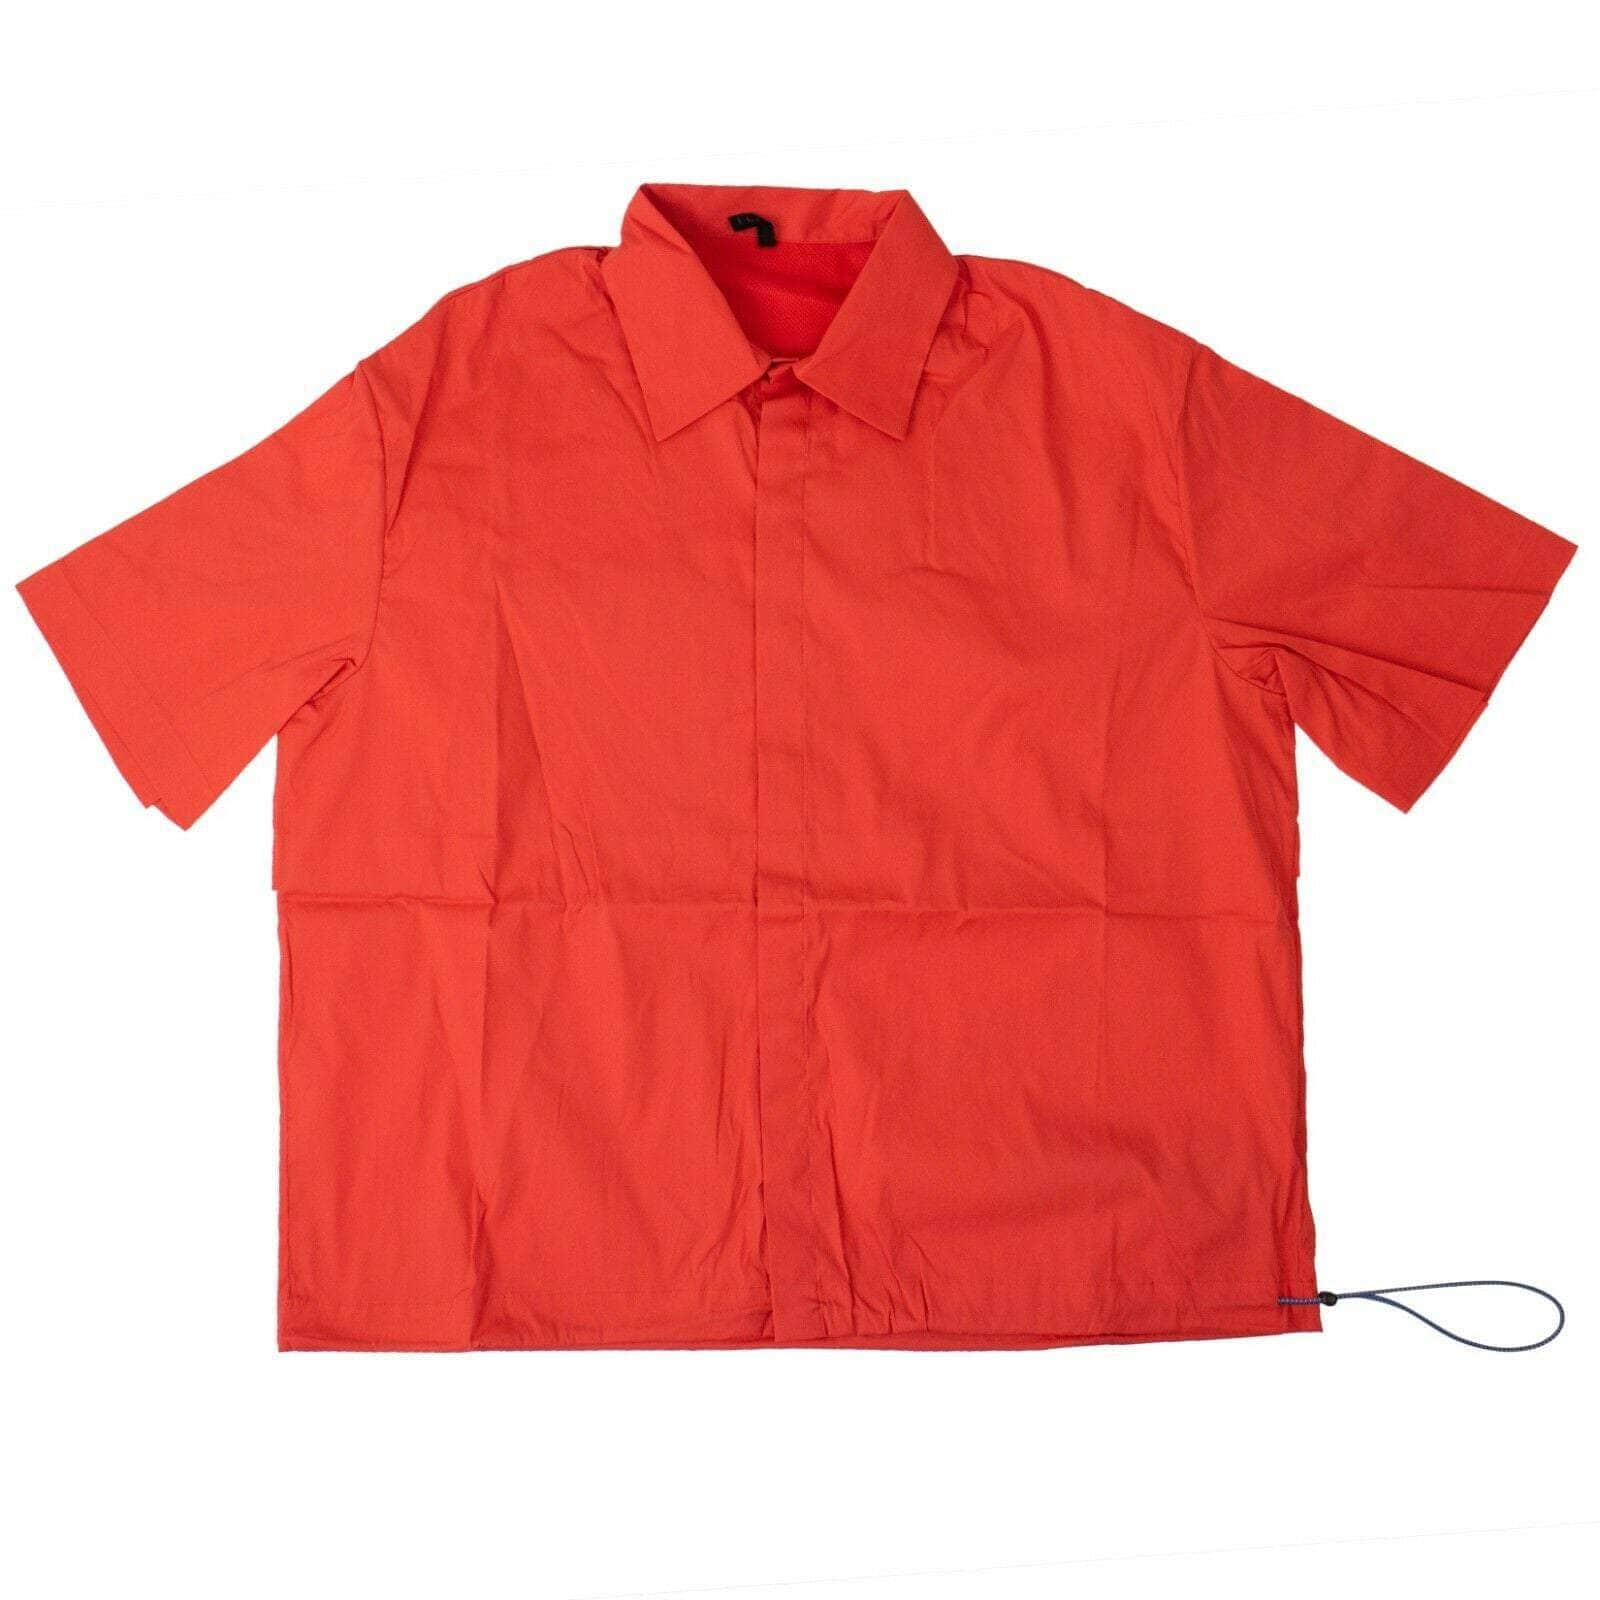 Unravel Project channelenable-all, chicmi, couponcollection, gender-mens, main-clothing, size-l, size-m, size-s, under-250, unravel-project Red Oversized Button Down Shirt